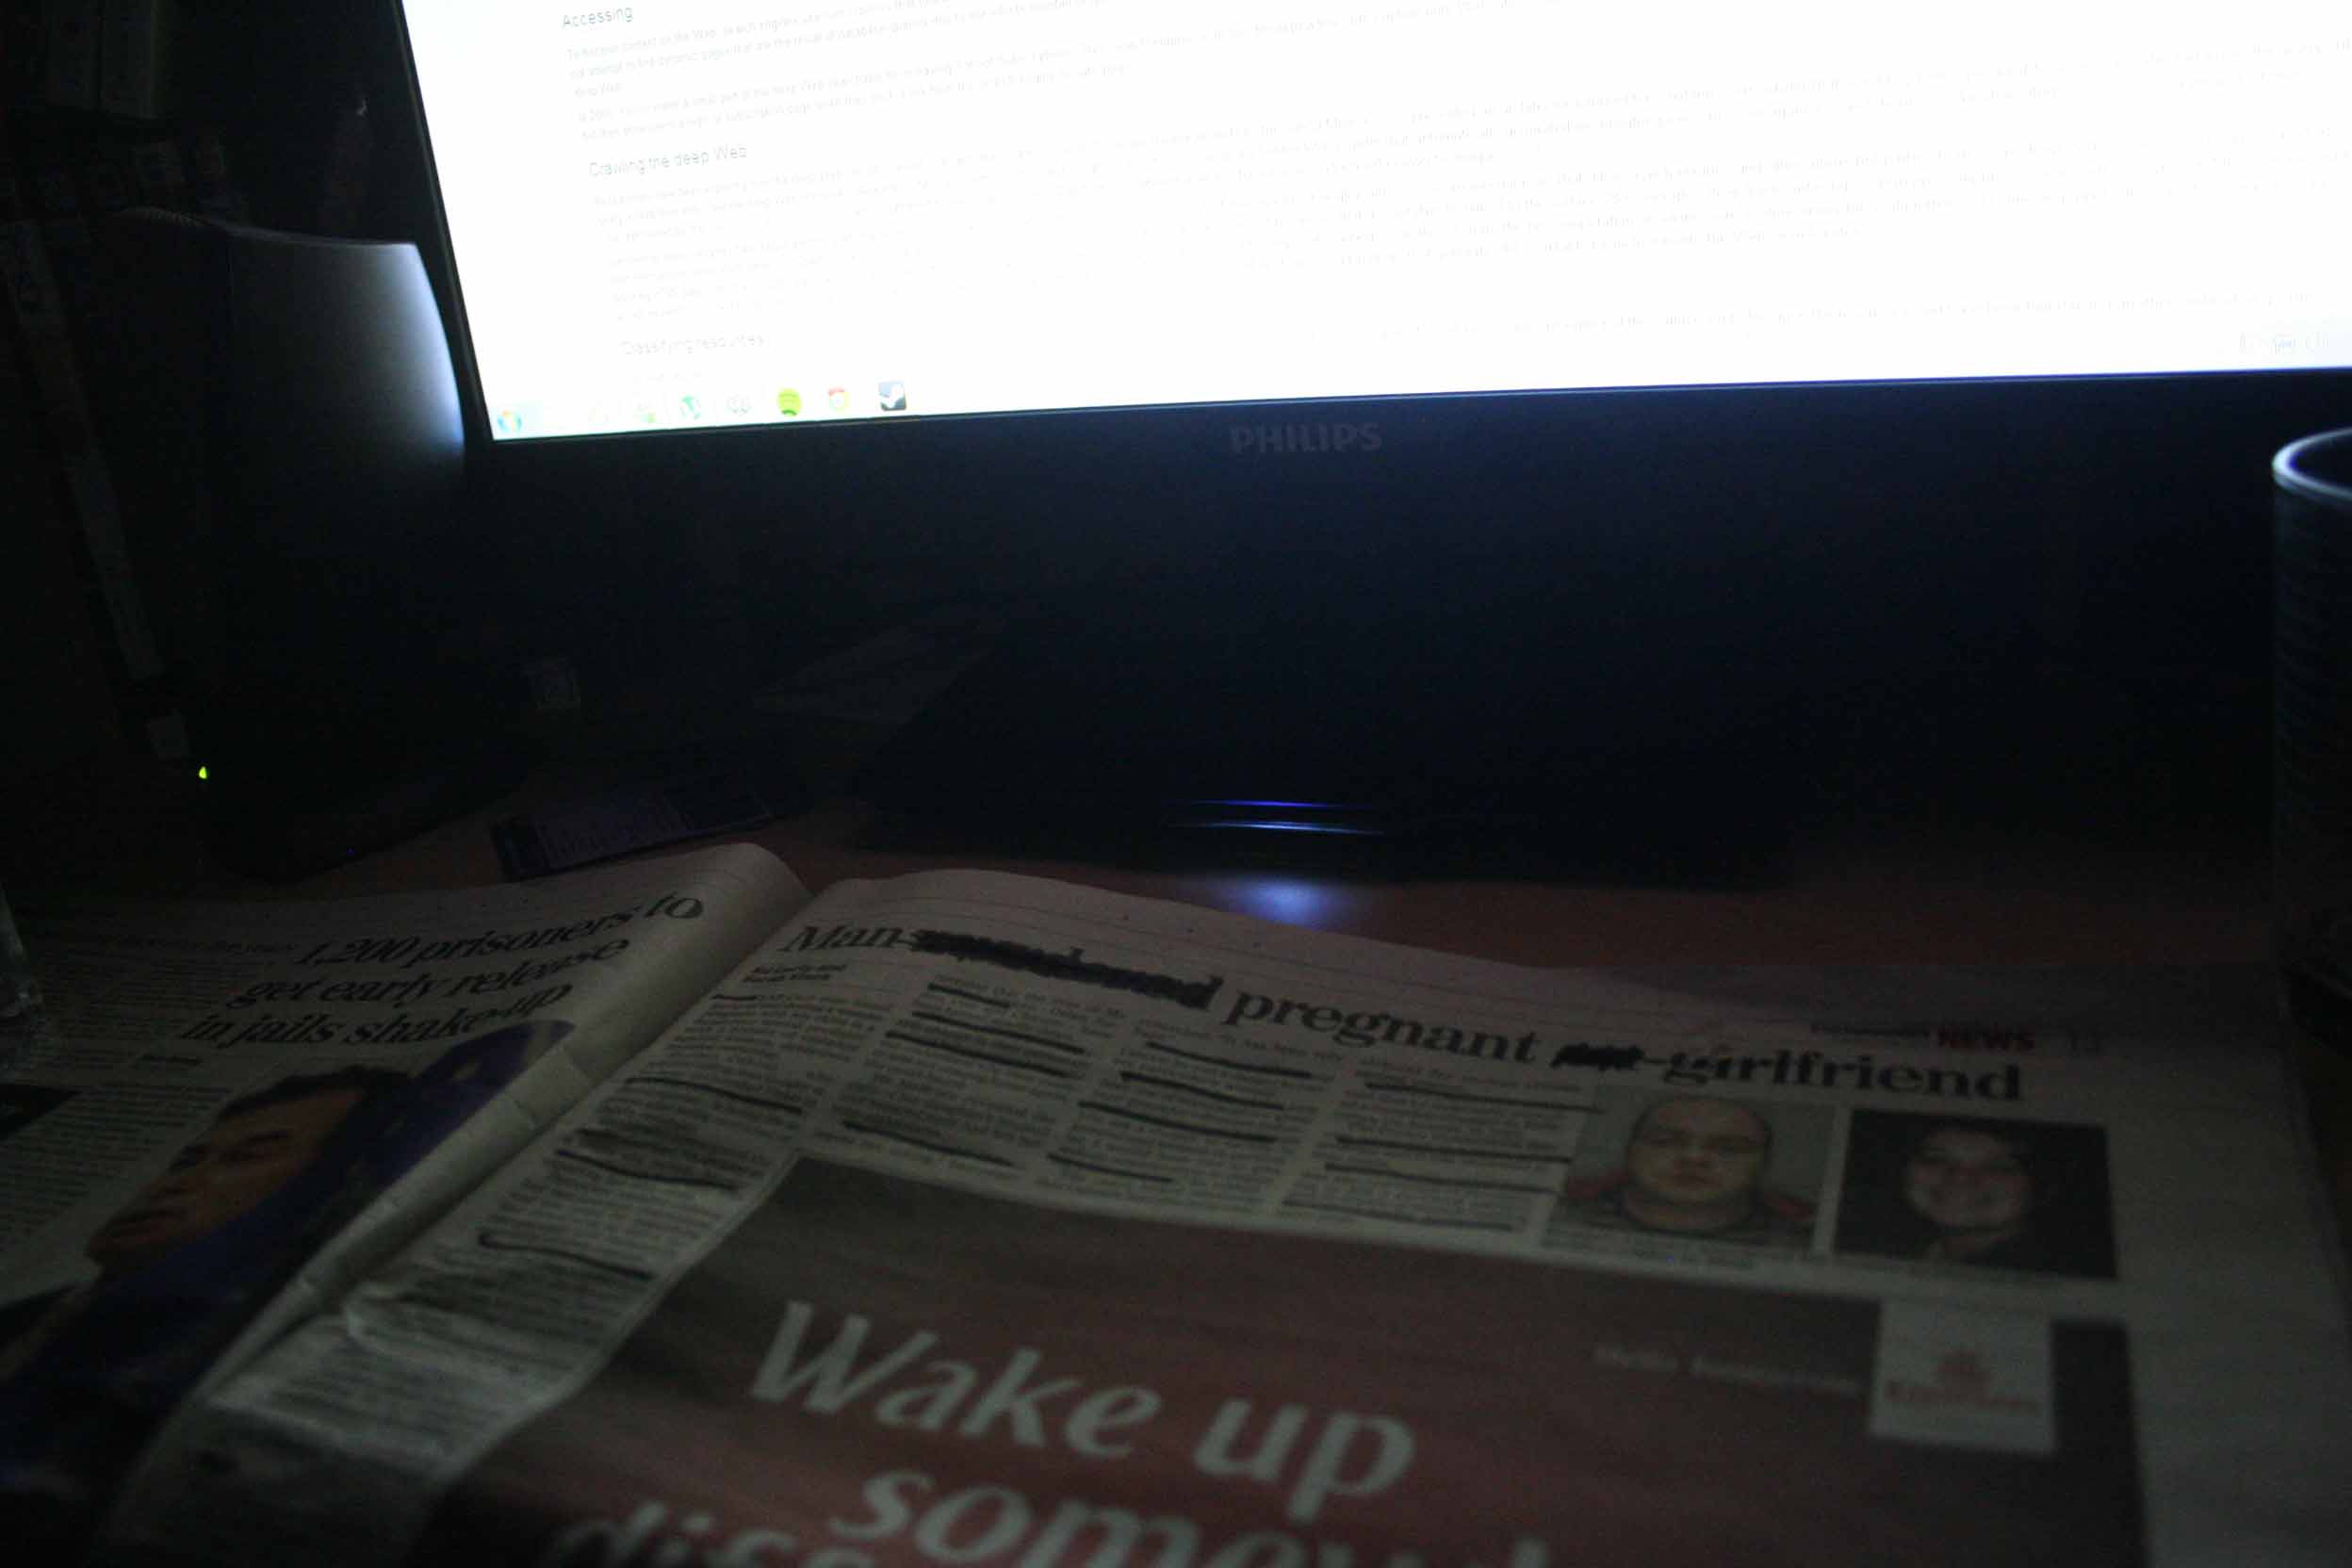 A censored paper beside a monitor